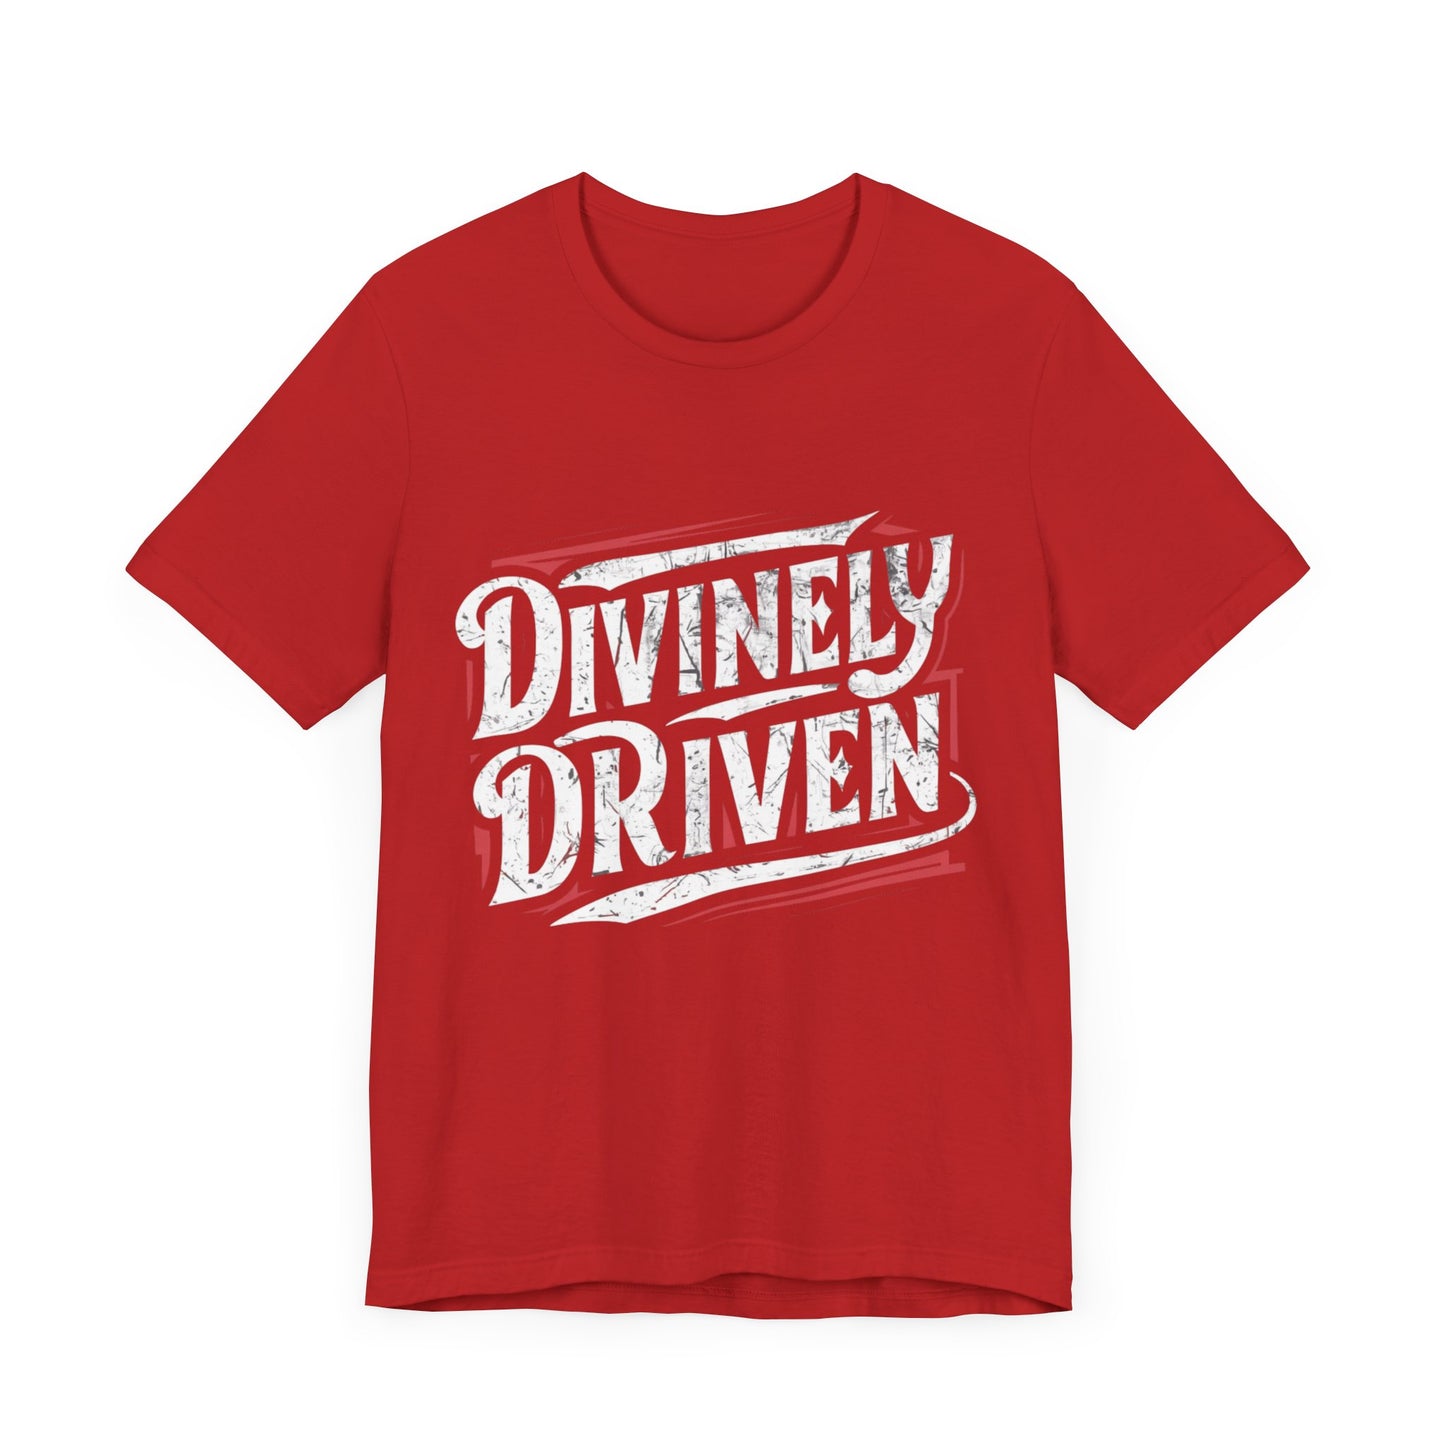 Divinely Driven Jersey Short Sleeve Tee For Men